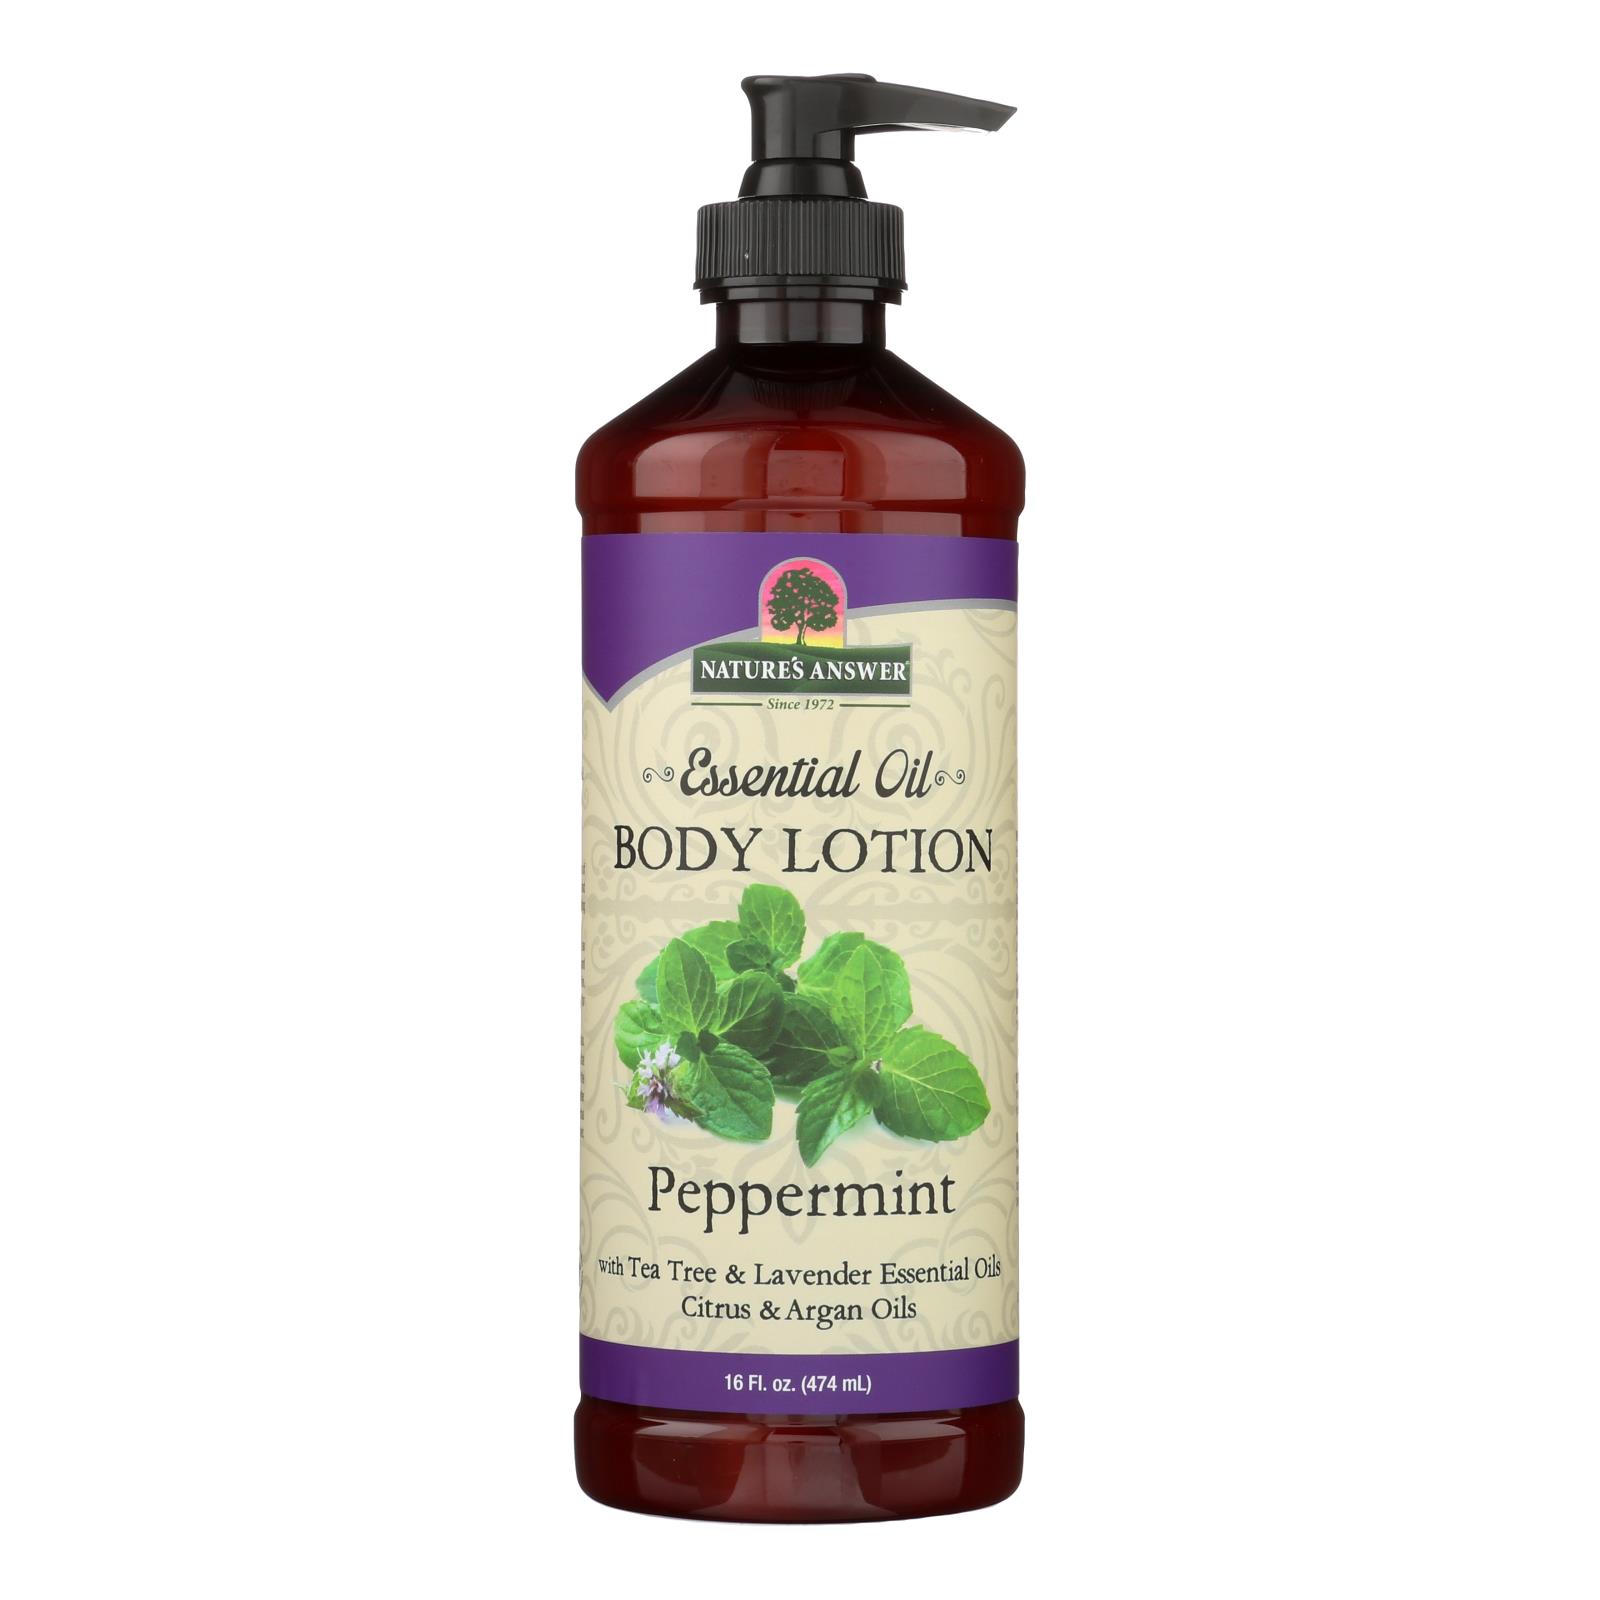 Nature's Answer Essential Oil Peppermint Body Lotion - 1 Each - 16 OZ